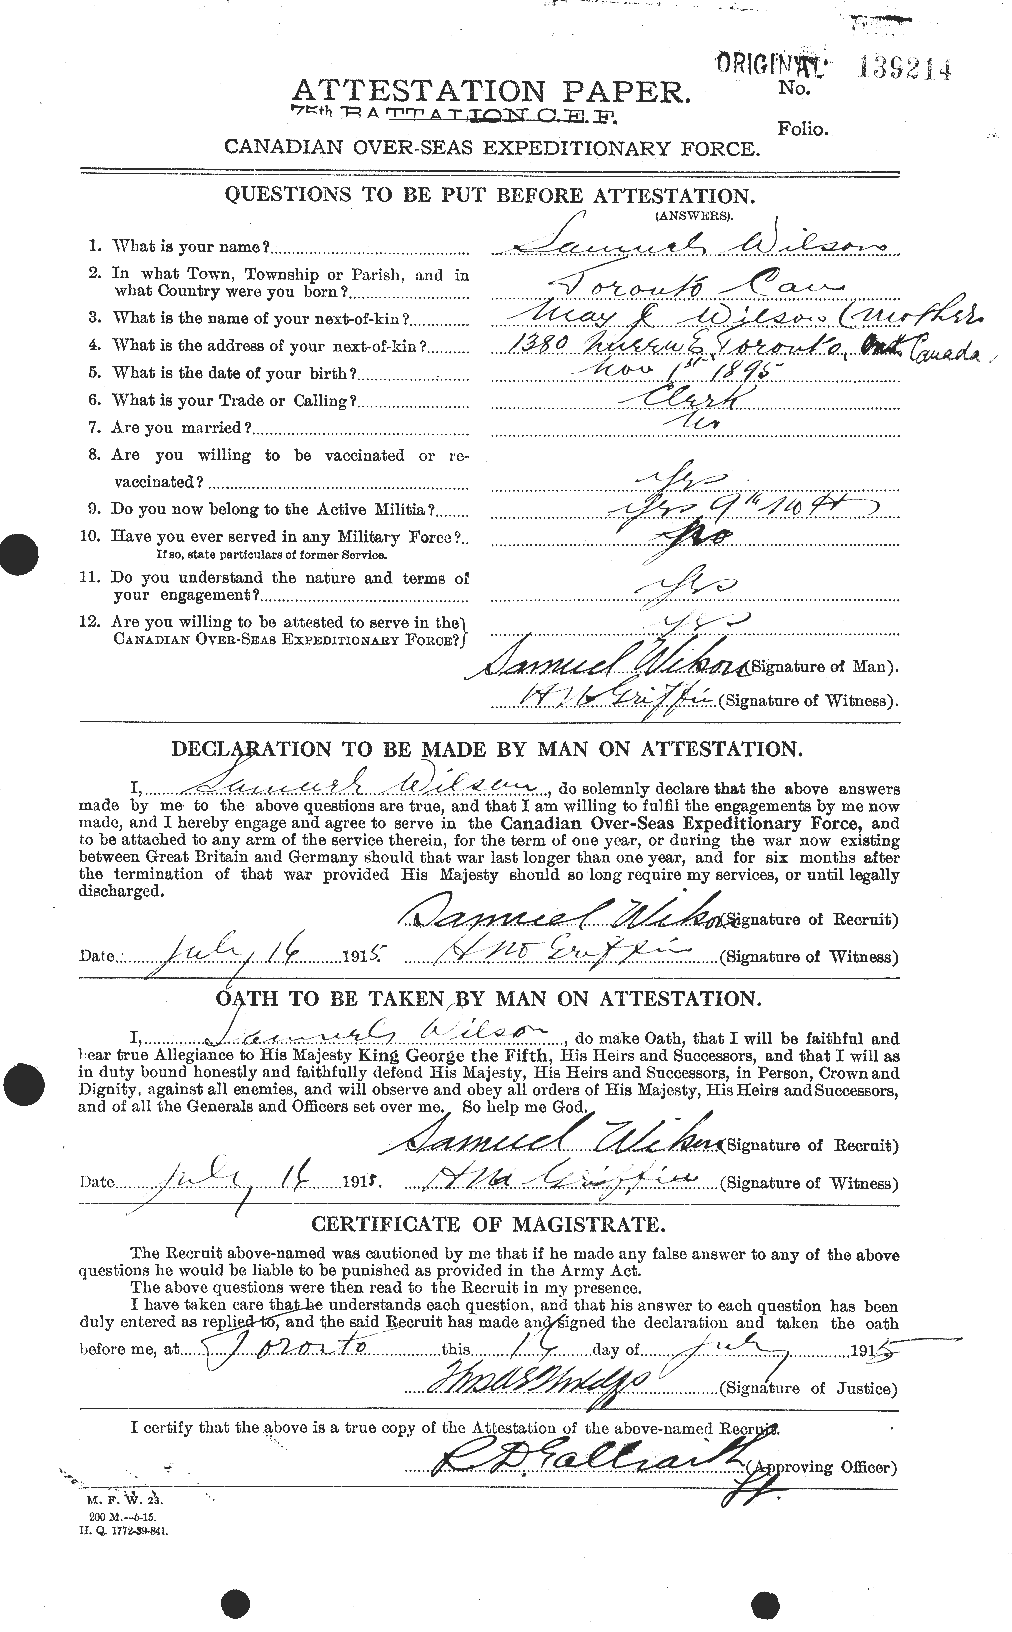 Personnel Records of the First World War - CEF 681094a